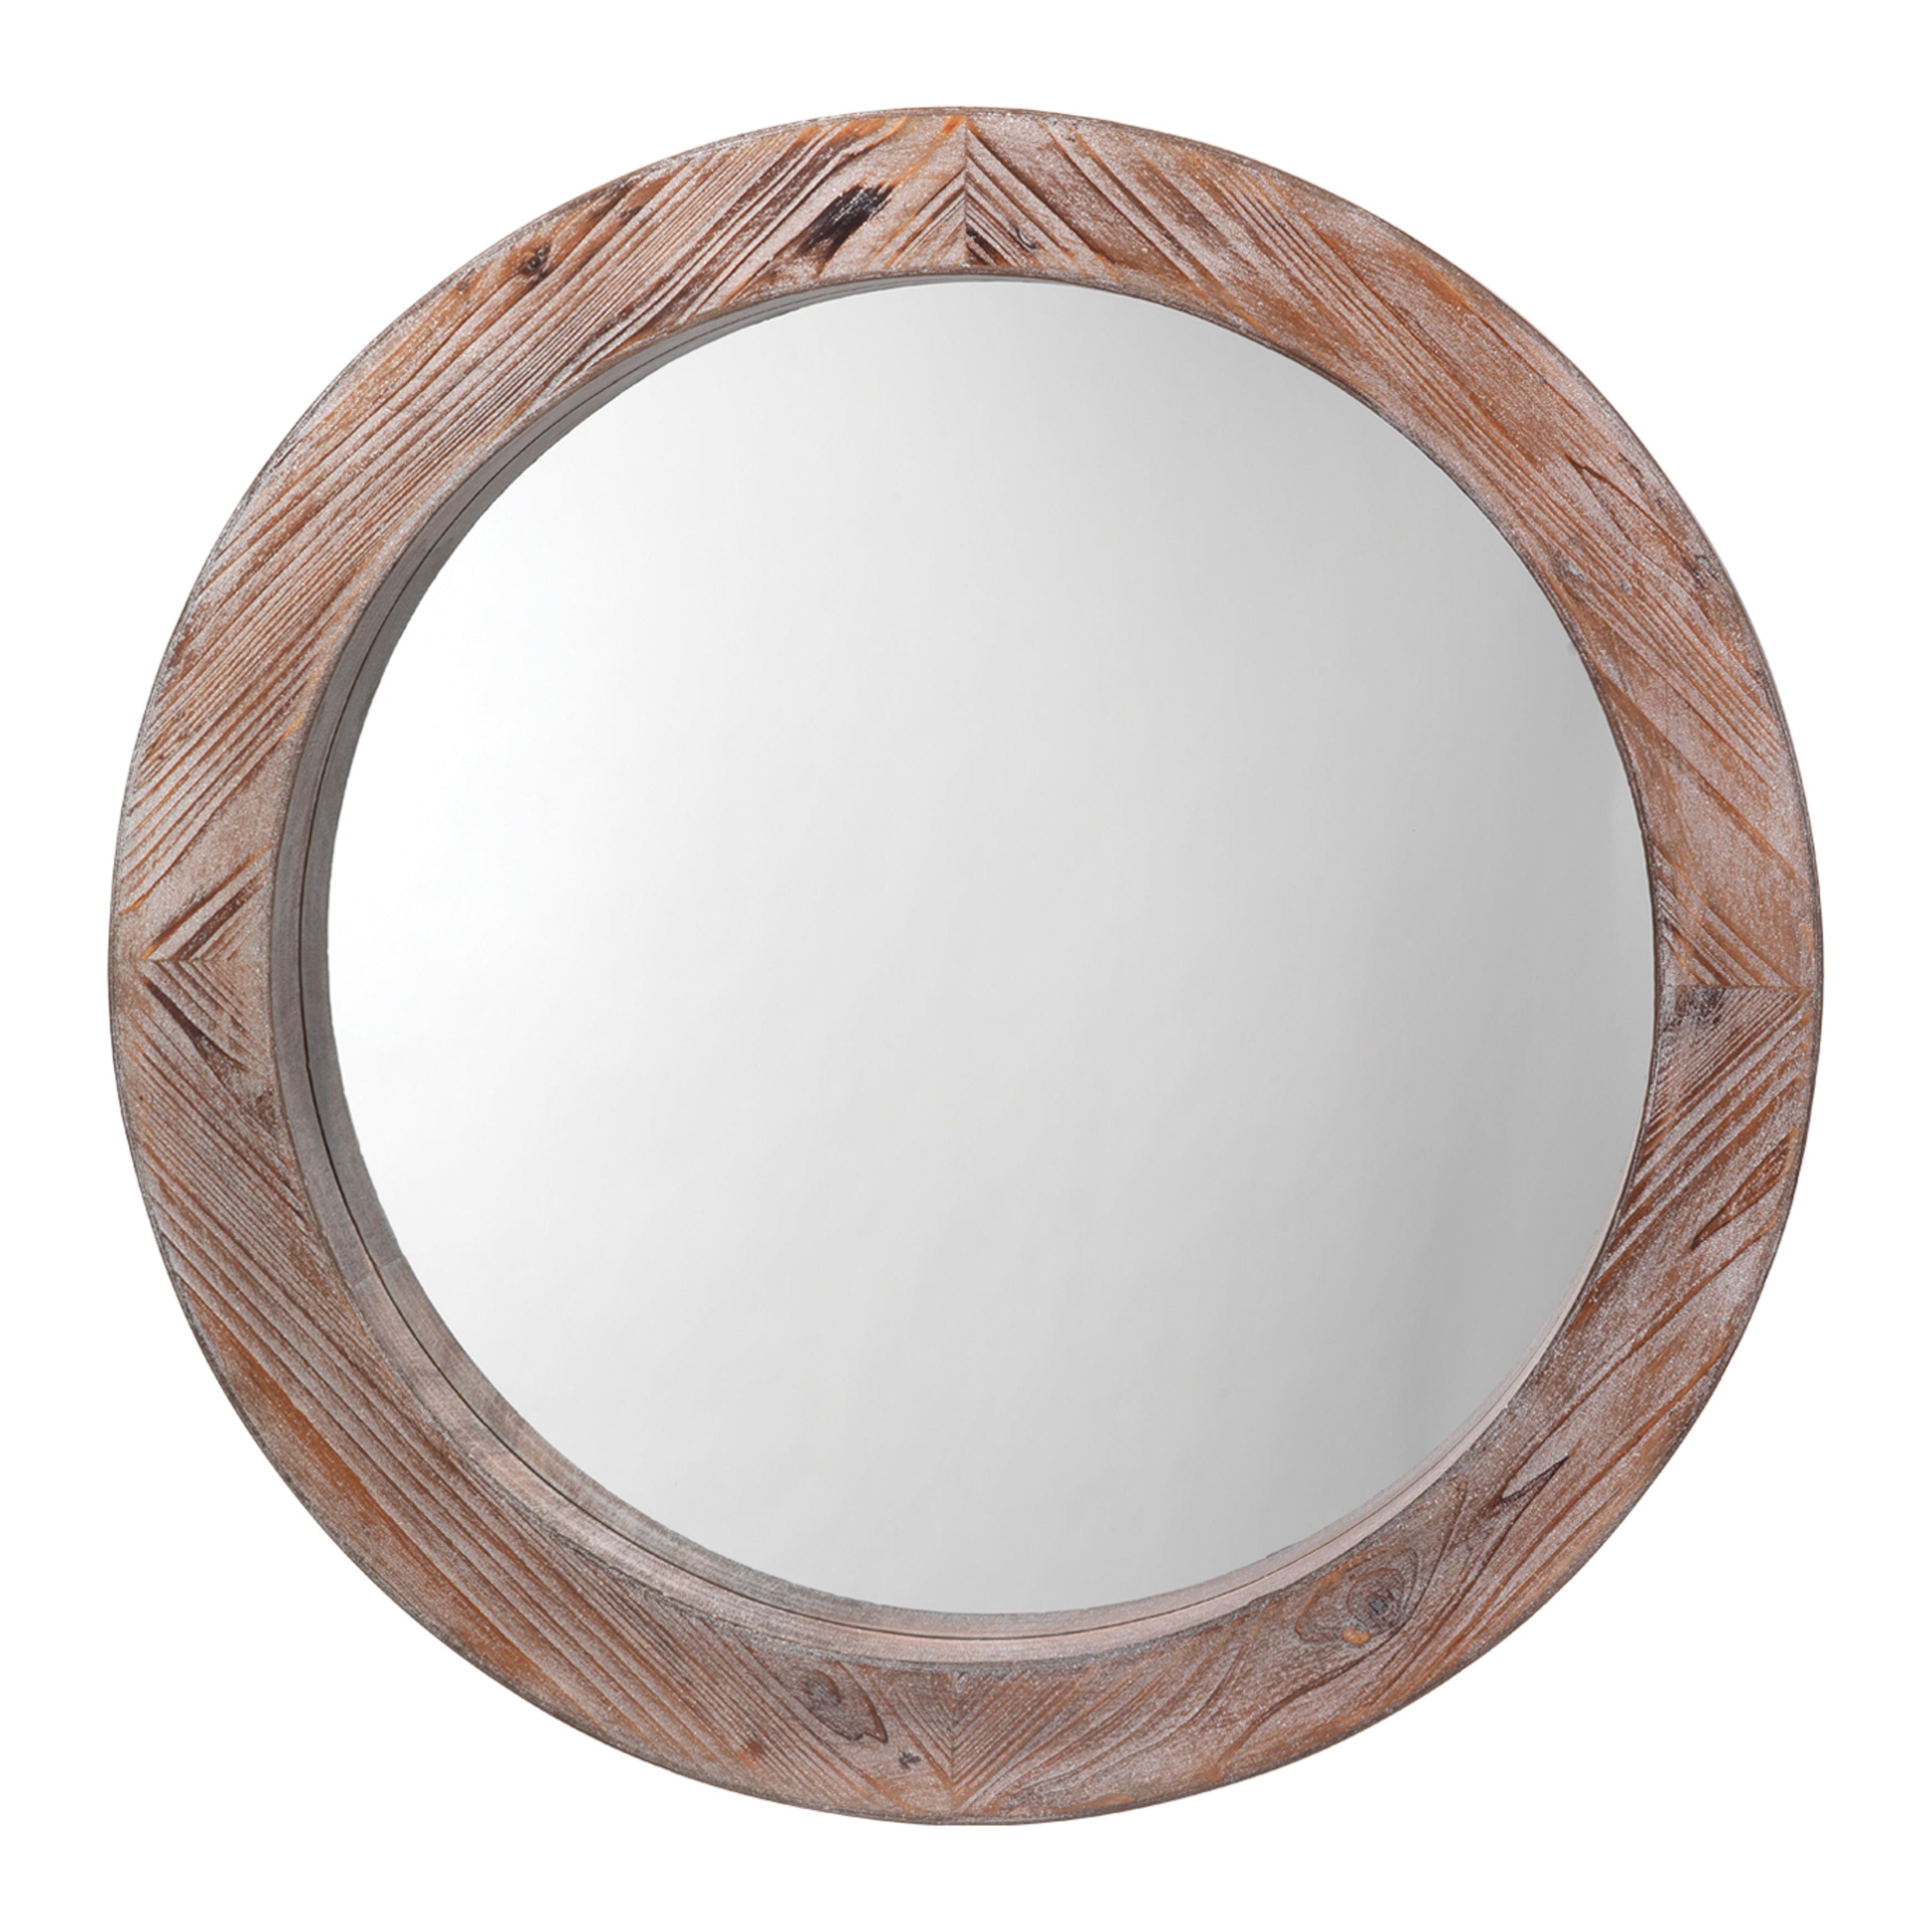 Jamie Young Company - BL616-M1 - Reclaimed Mirror -  - Grey